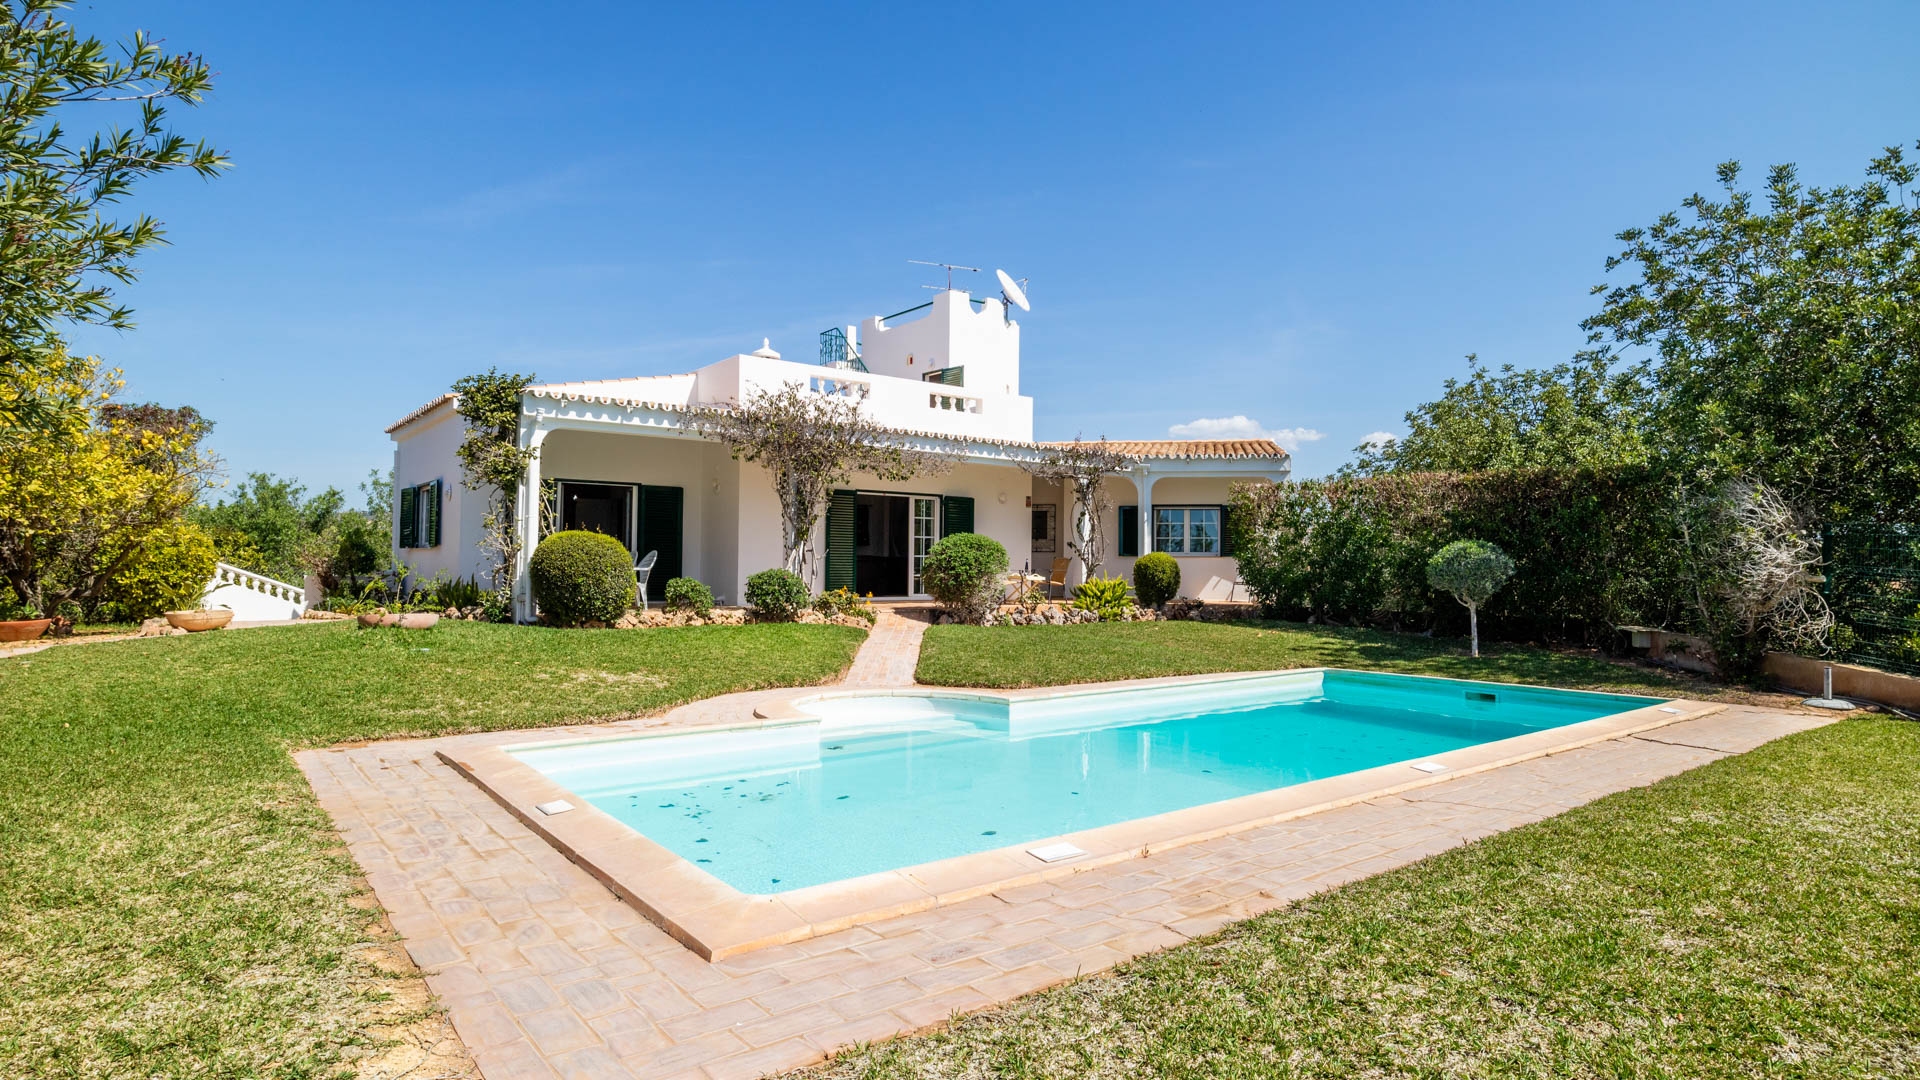  2+2 Bedroom Villa with Sea Views near Vilamoura | VM1916 South facing villa with sea views close to amenities and suitable for holiday rentals or full time living, close to Vilamoura